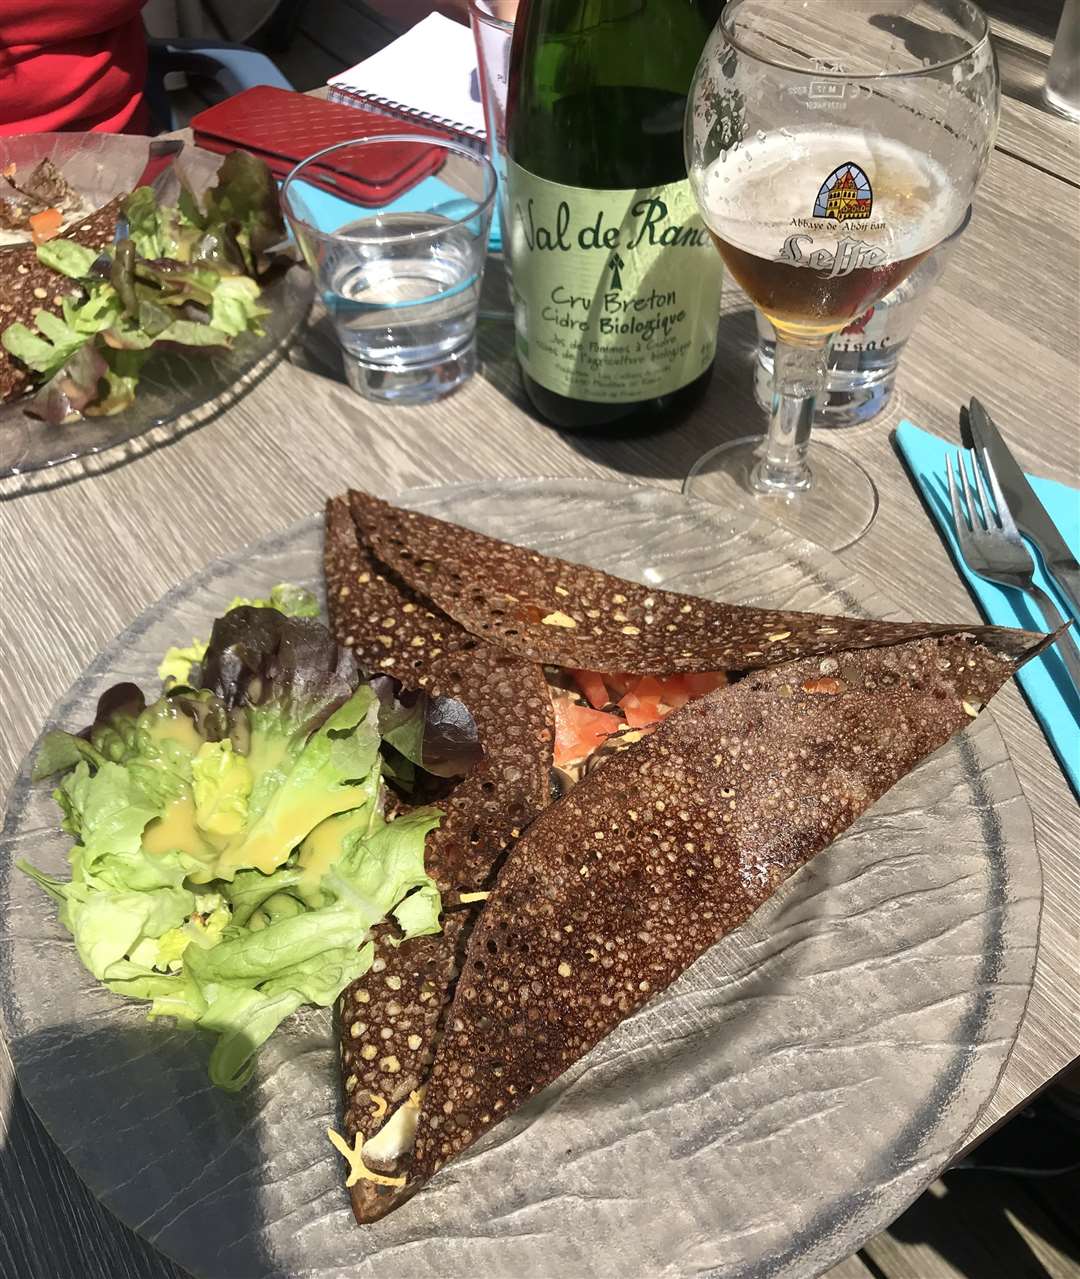 Delicious crepes are the perfect snack after a cycle through the forest (2578100)